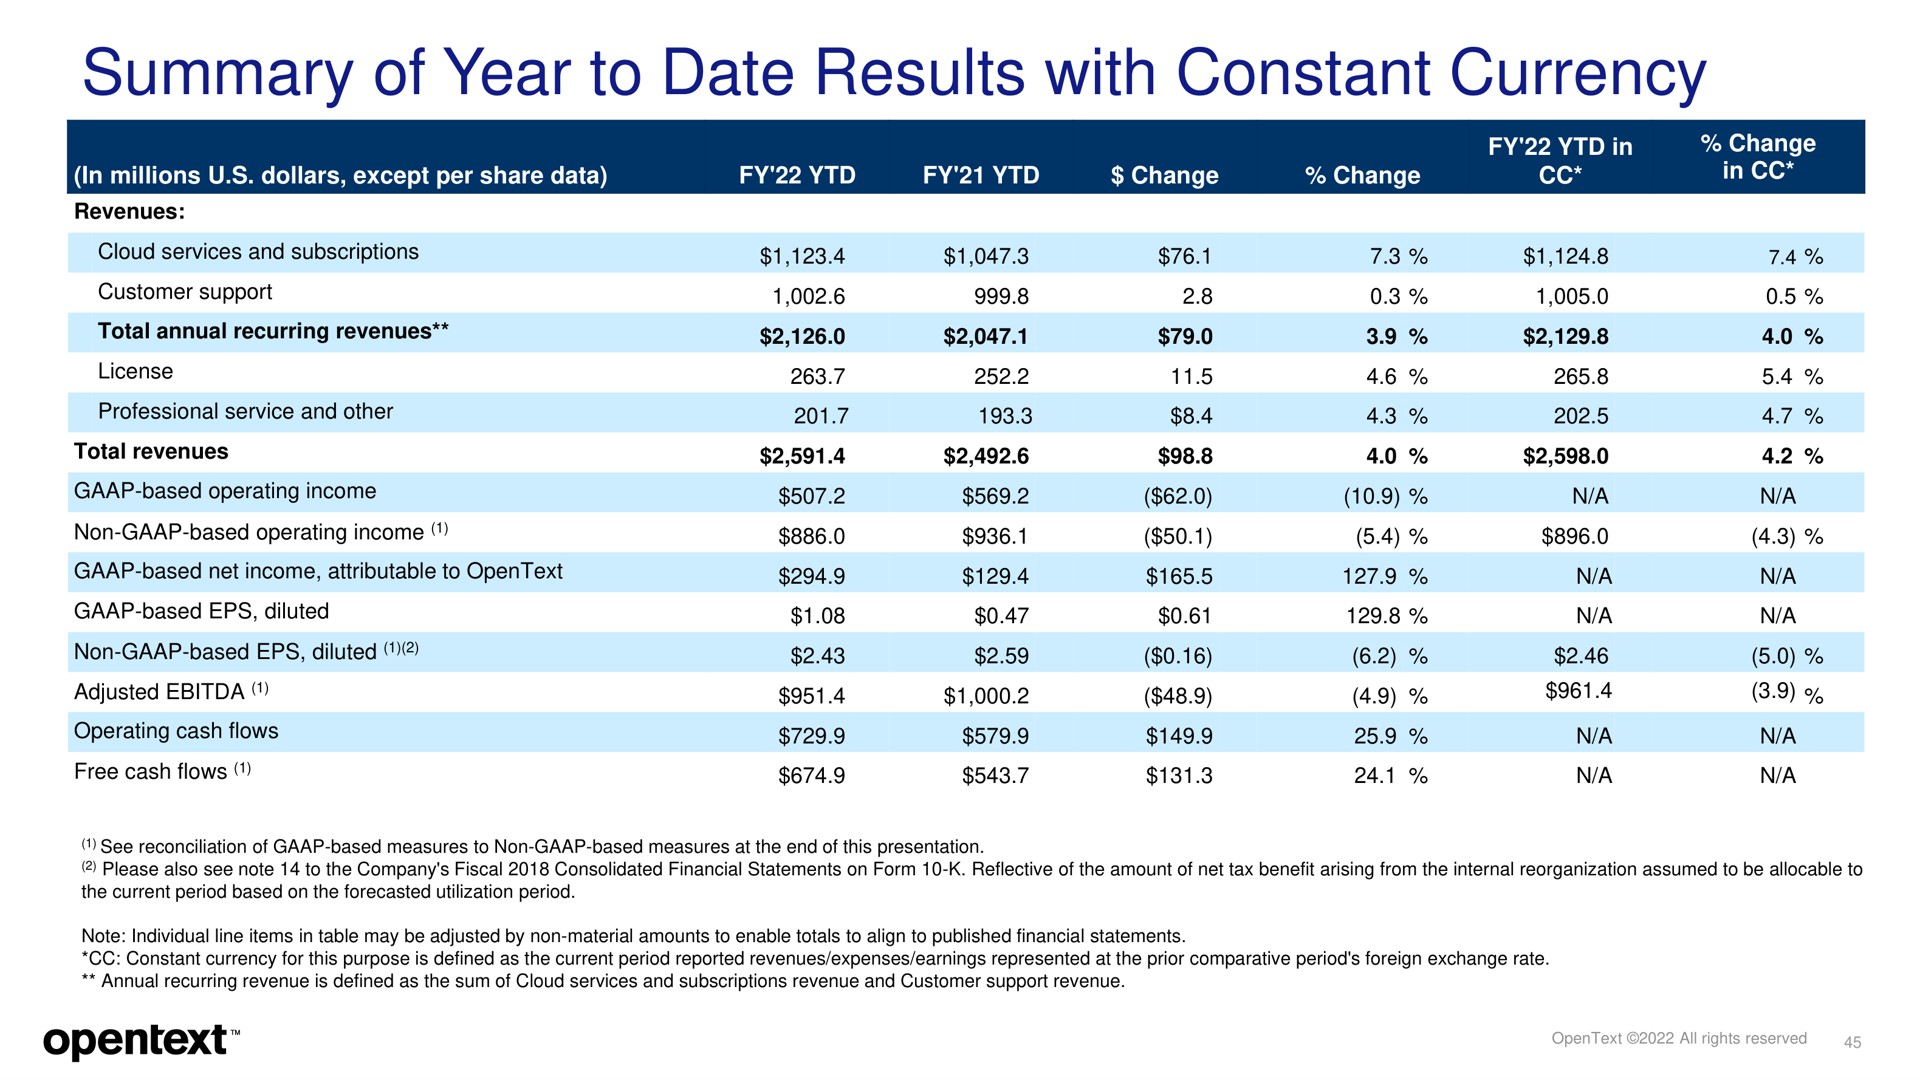 summary of year to date results with constant currency | OpenText